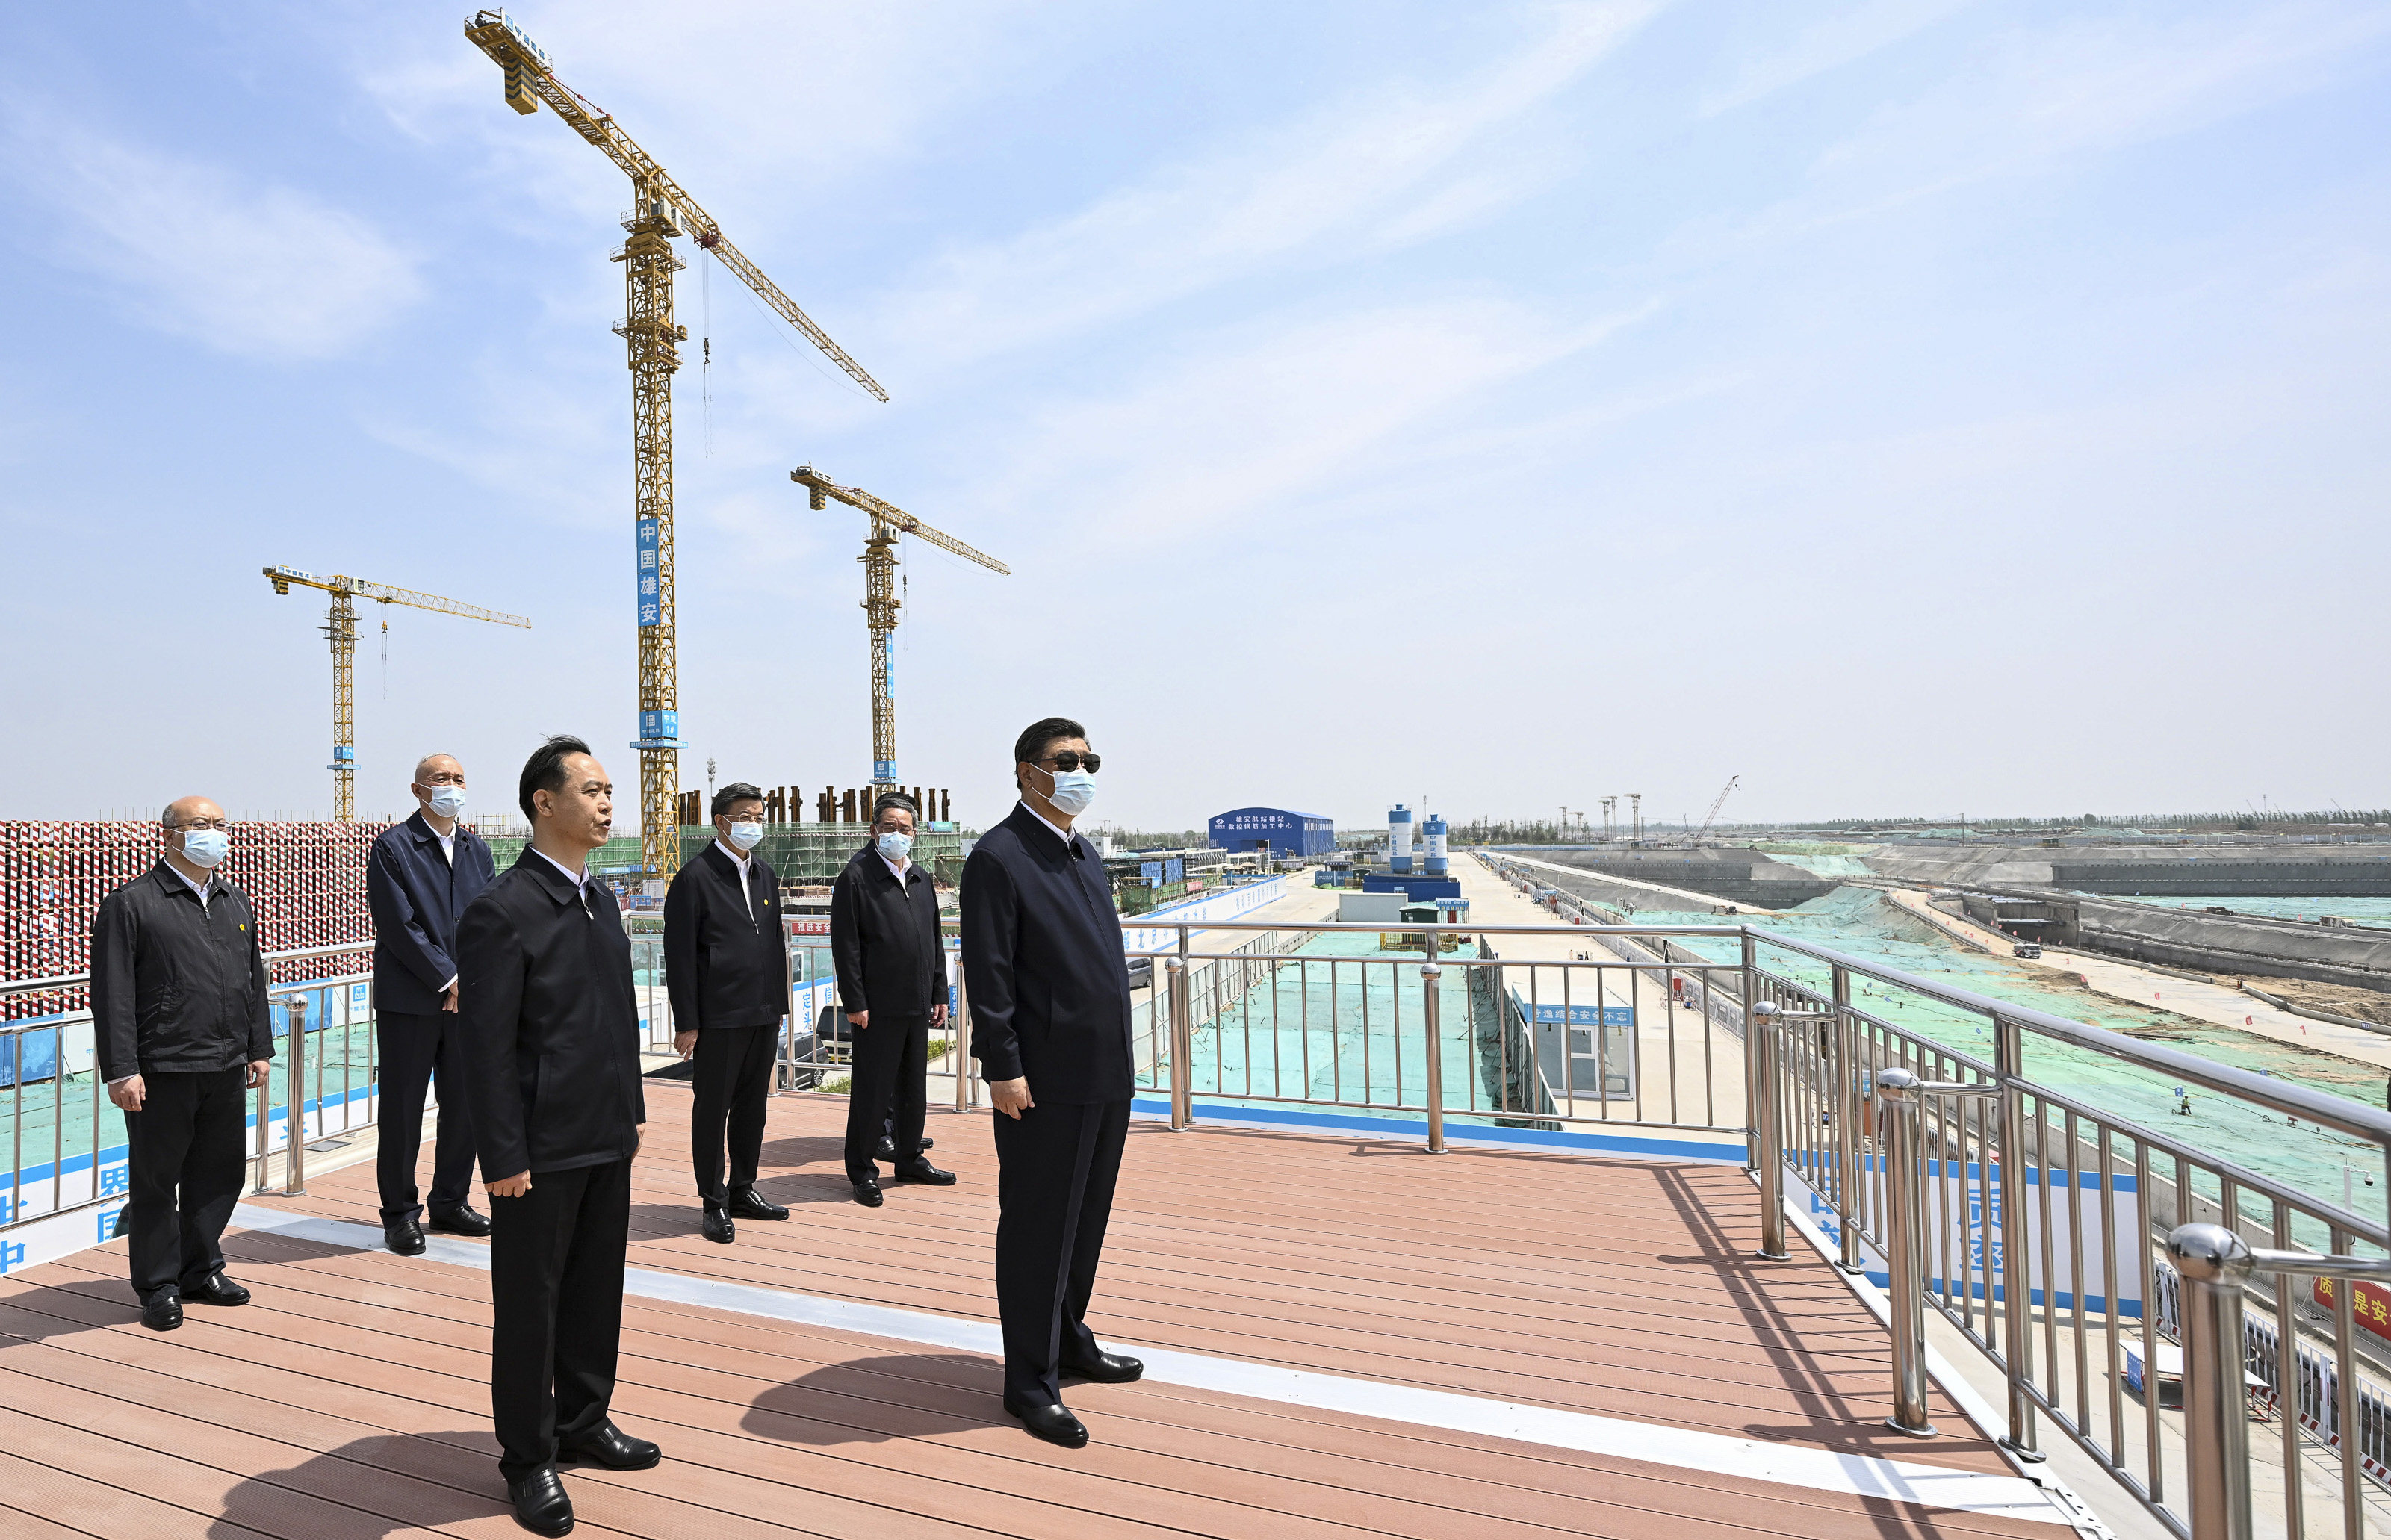 President Xi Jinping described the growth of the Xiongan New Area as a “miracle” during his visit. Photo: Xinhua